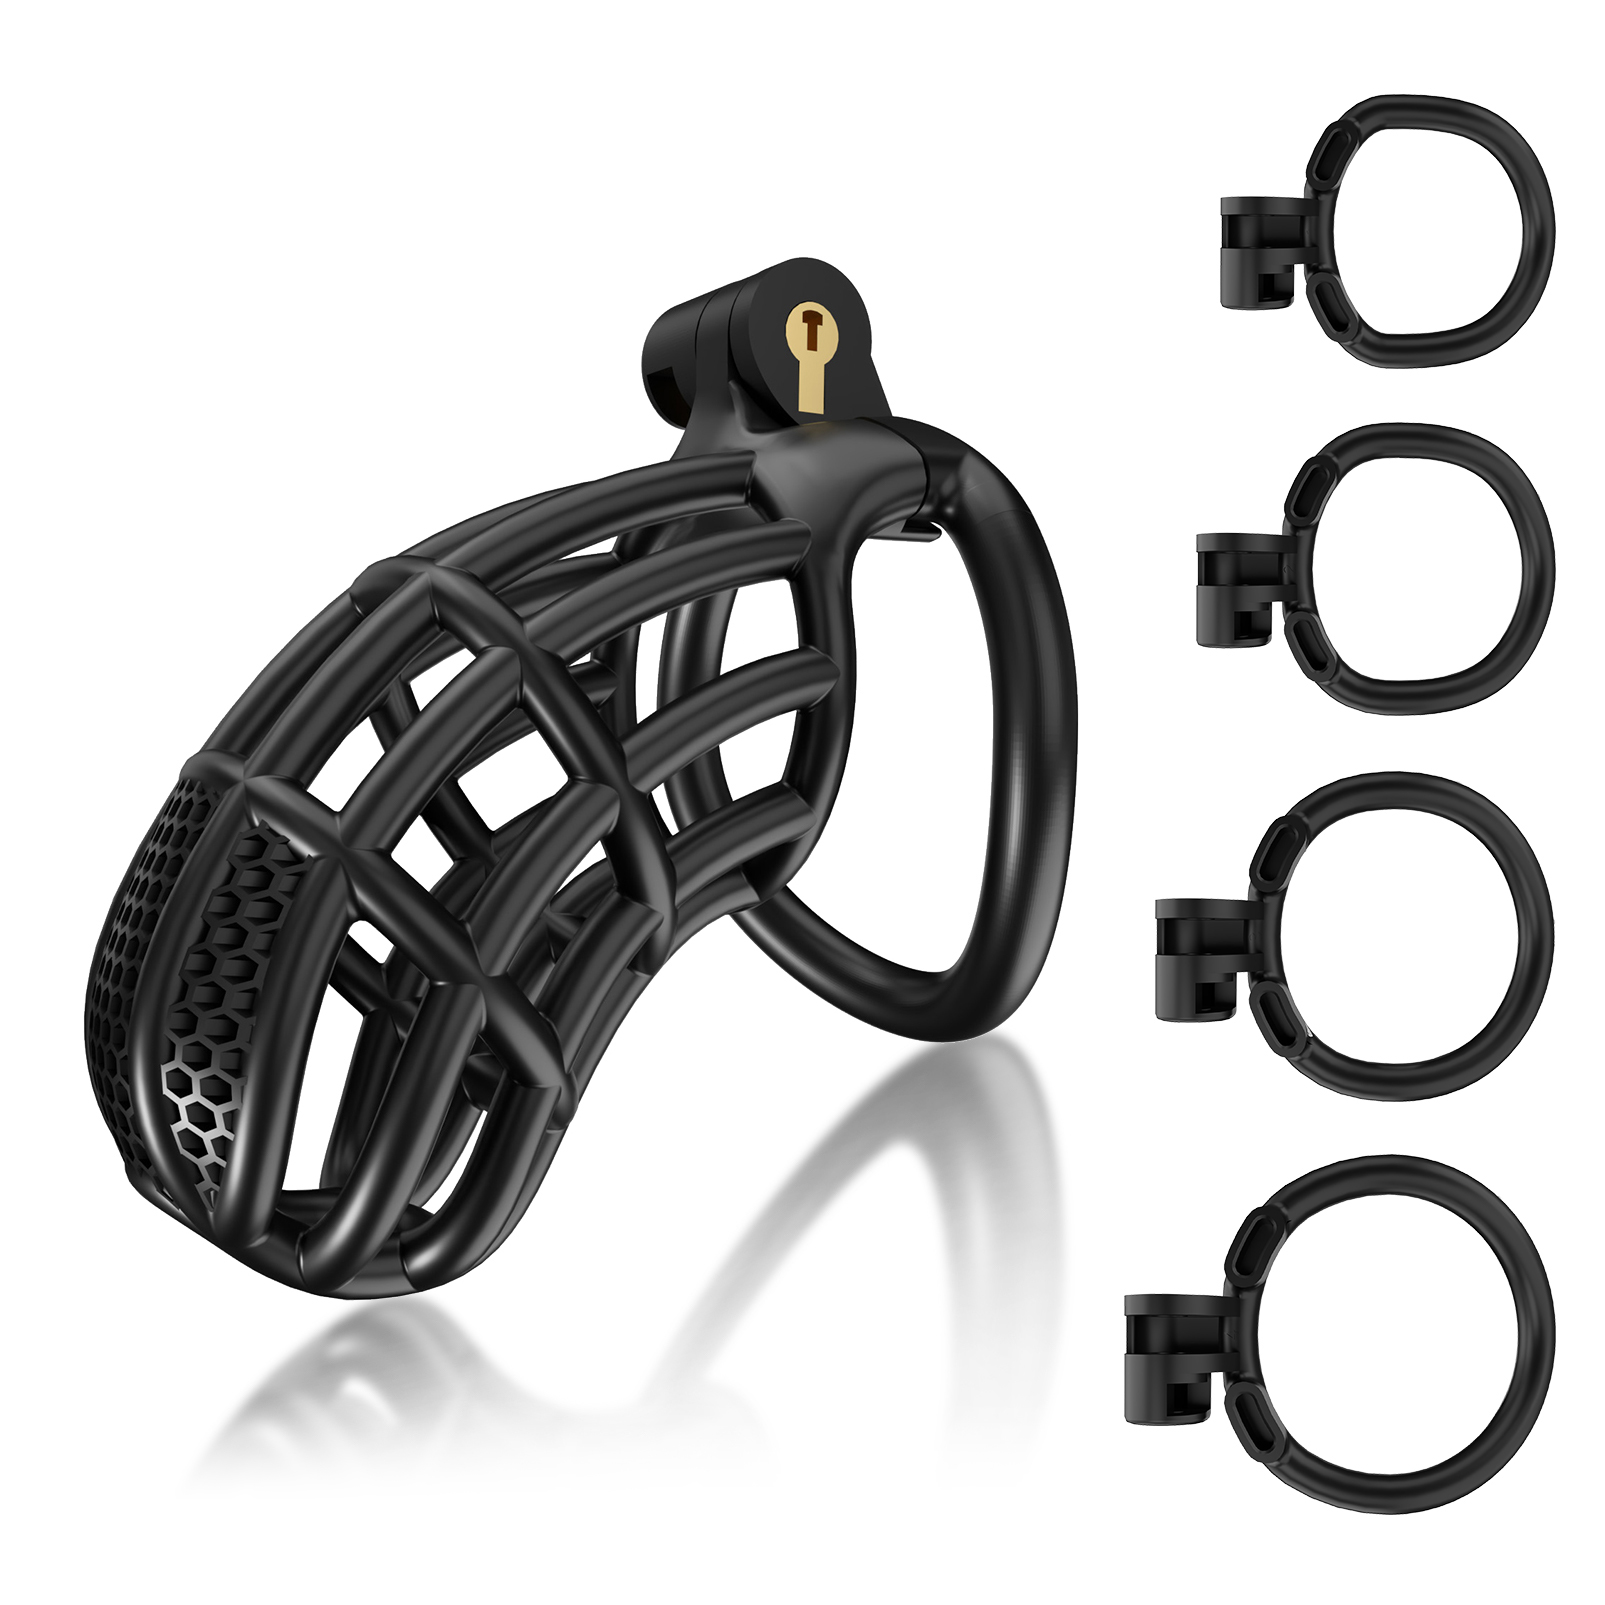 Male Chastity Device Cock Cage - UTIMI Large Plastic Chastity Cage for Man Penis Exercise 3D Printed Black Bondage Gear Lightweight Adult Sex Toy with 4 Sizes Rings Invisible Lock and Key